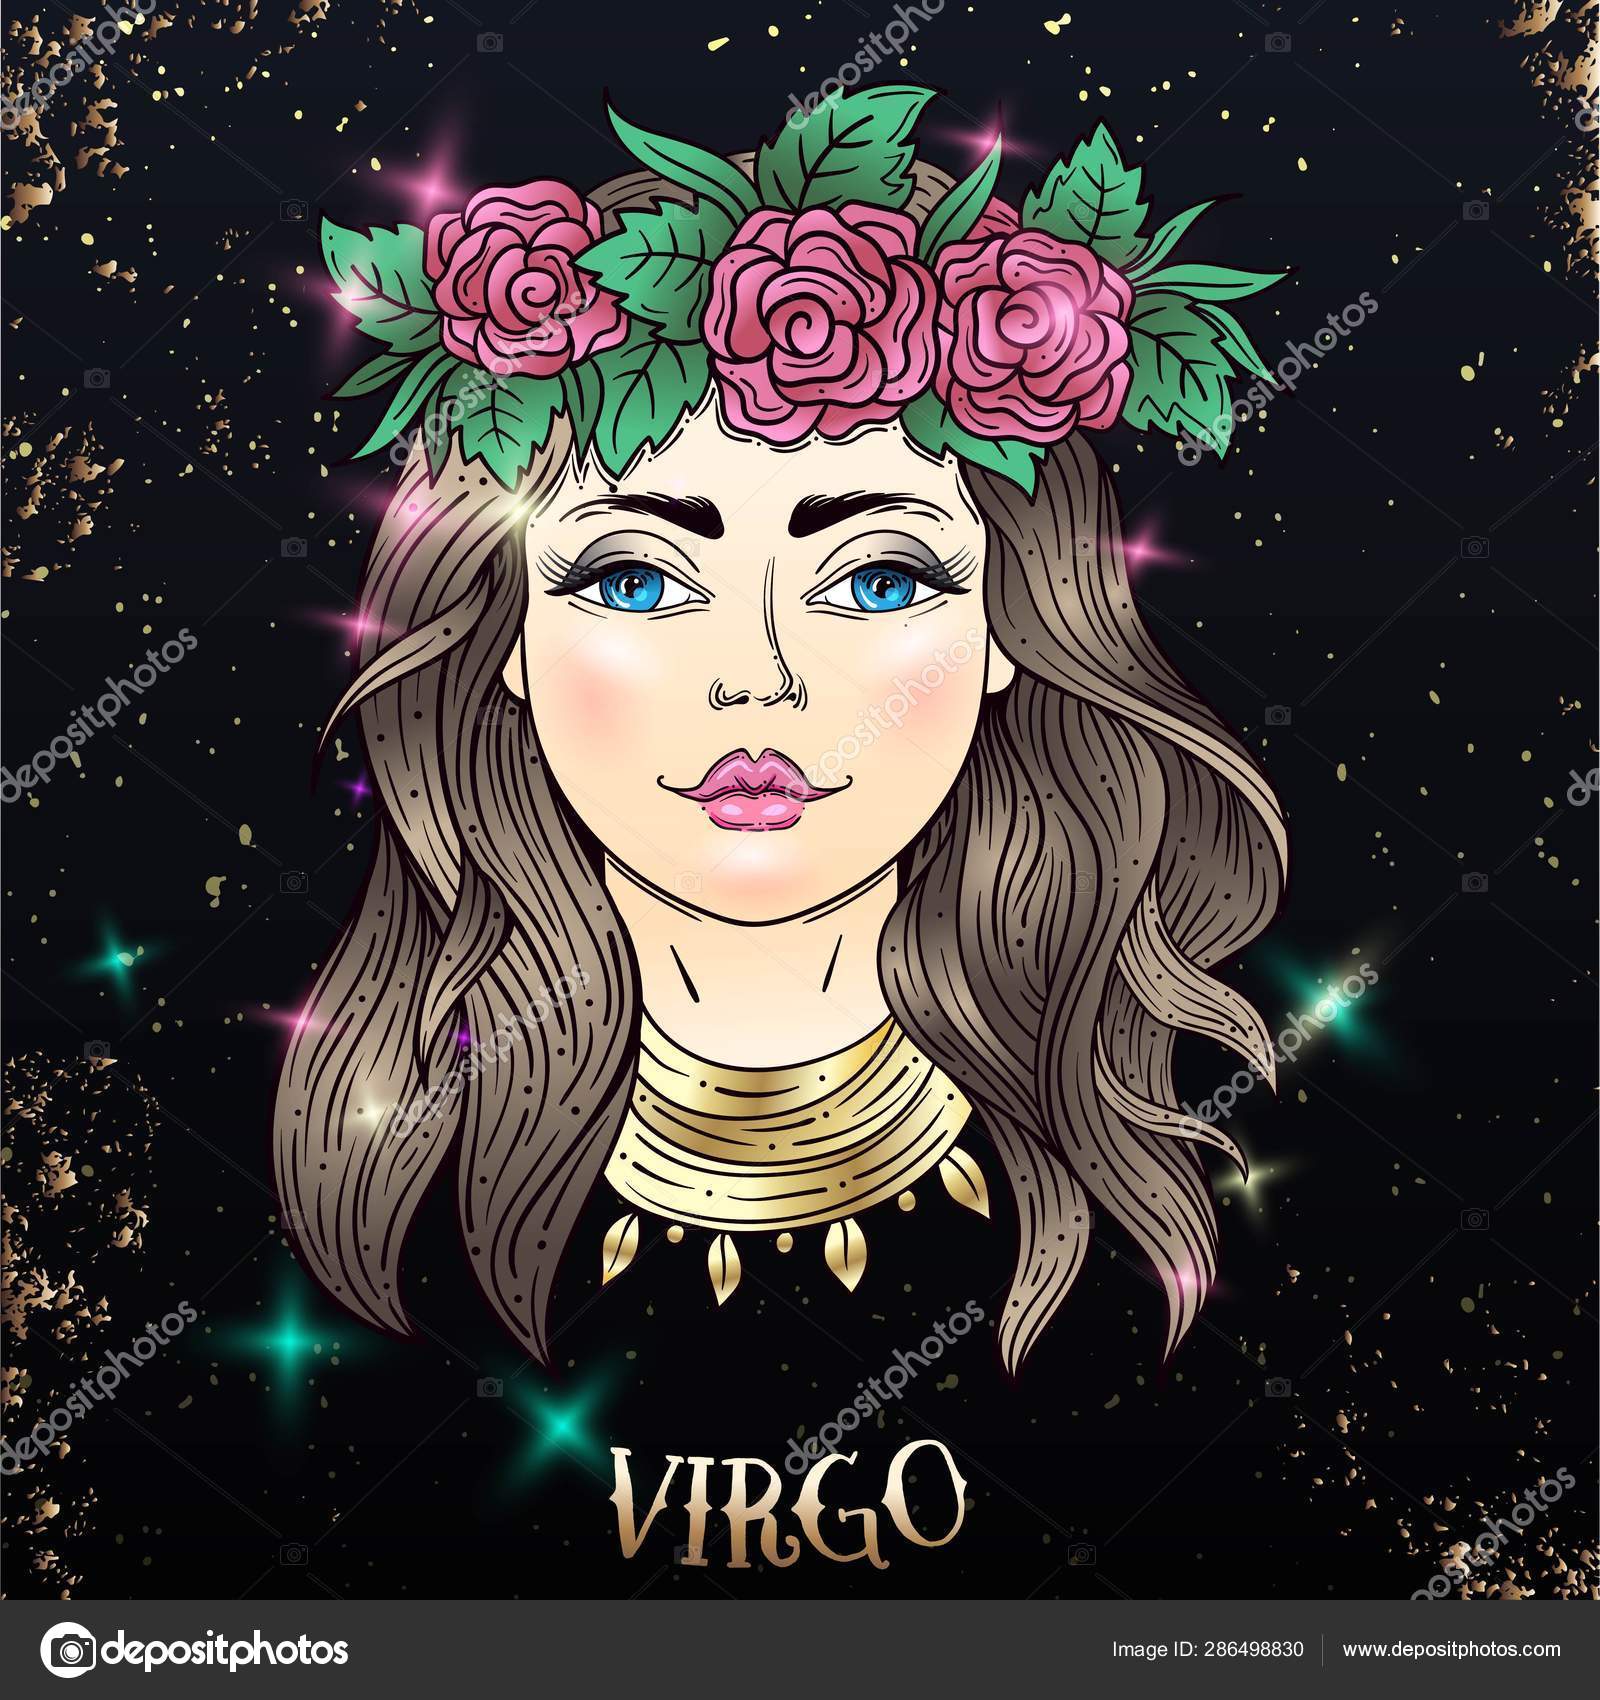 Virgo Images Browse 58652 Stock Photos  Vectors Free Download with Trial   Shutterstock